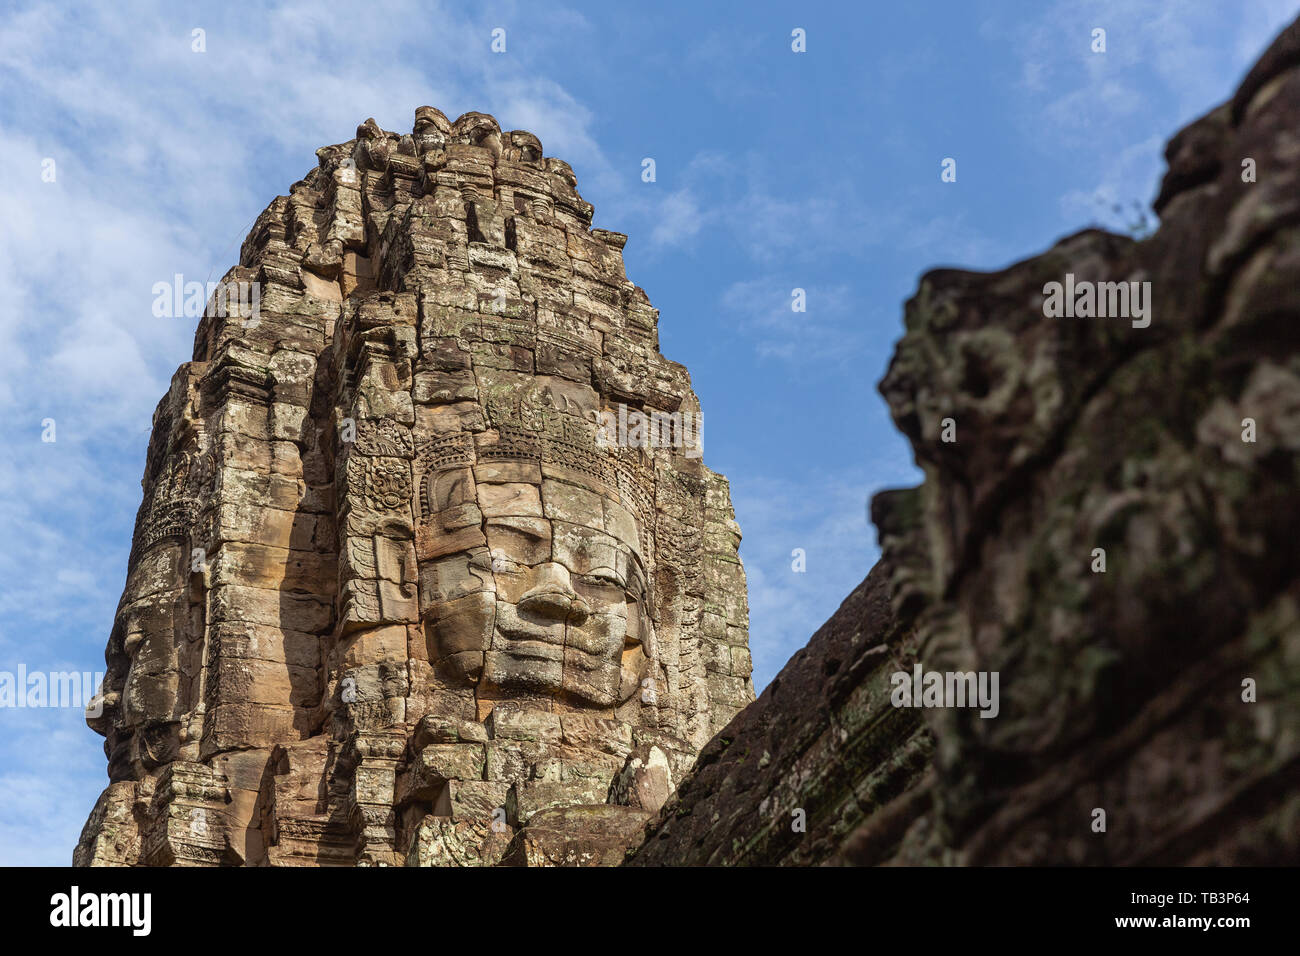 Ancient stone faces of Bayon Temple, Angkor Thom, UNESCO World Heritage Site, Siem Reap Province, Cambodia, Indochina, Southeast Asia, Asia Stock Photo